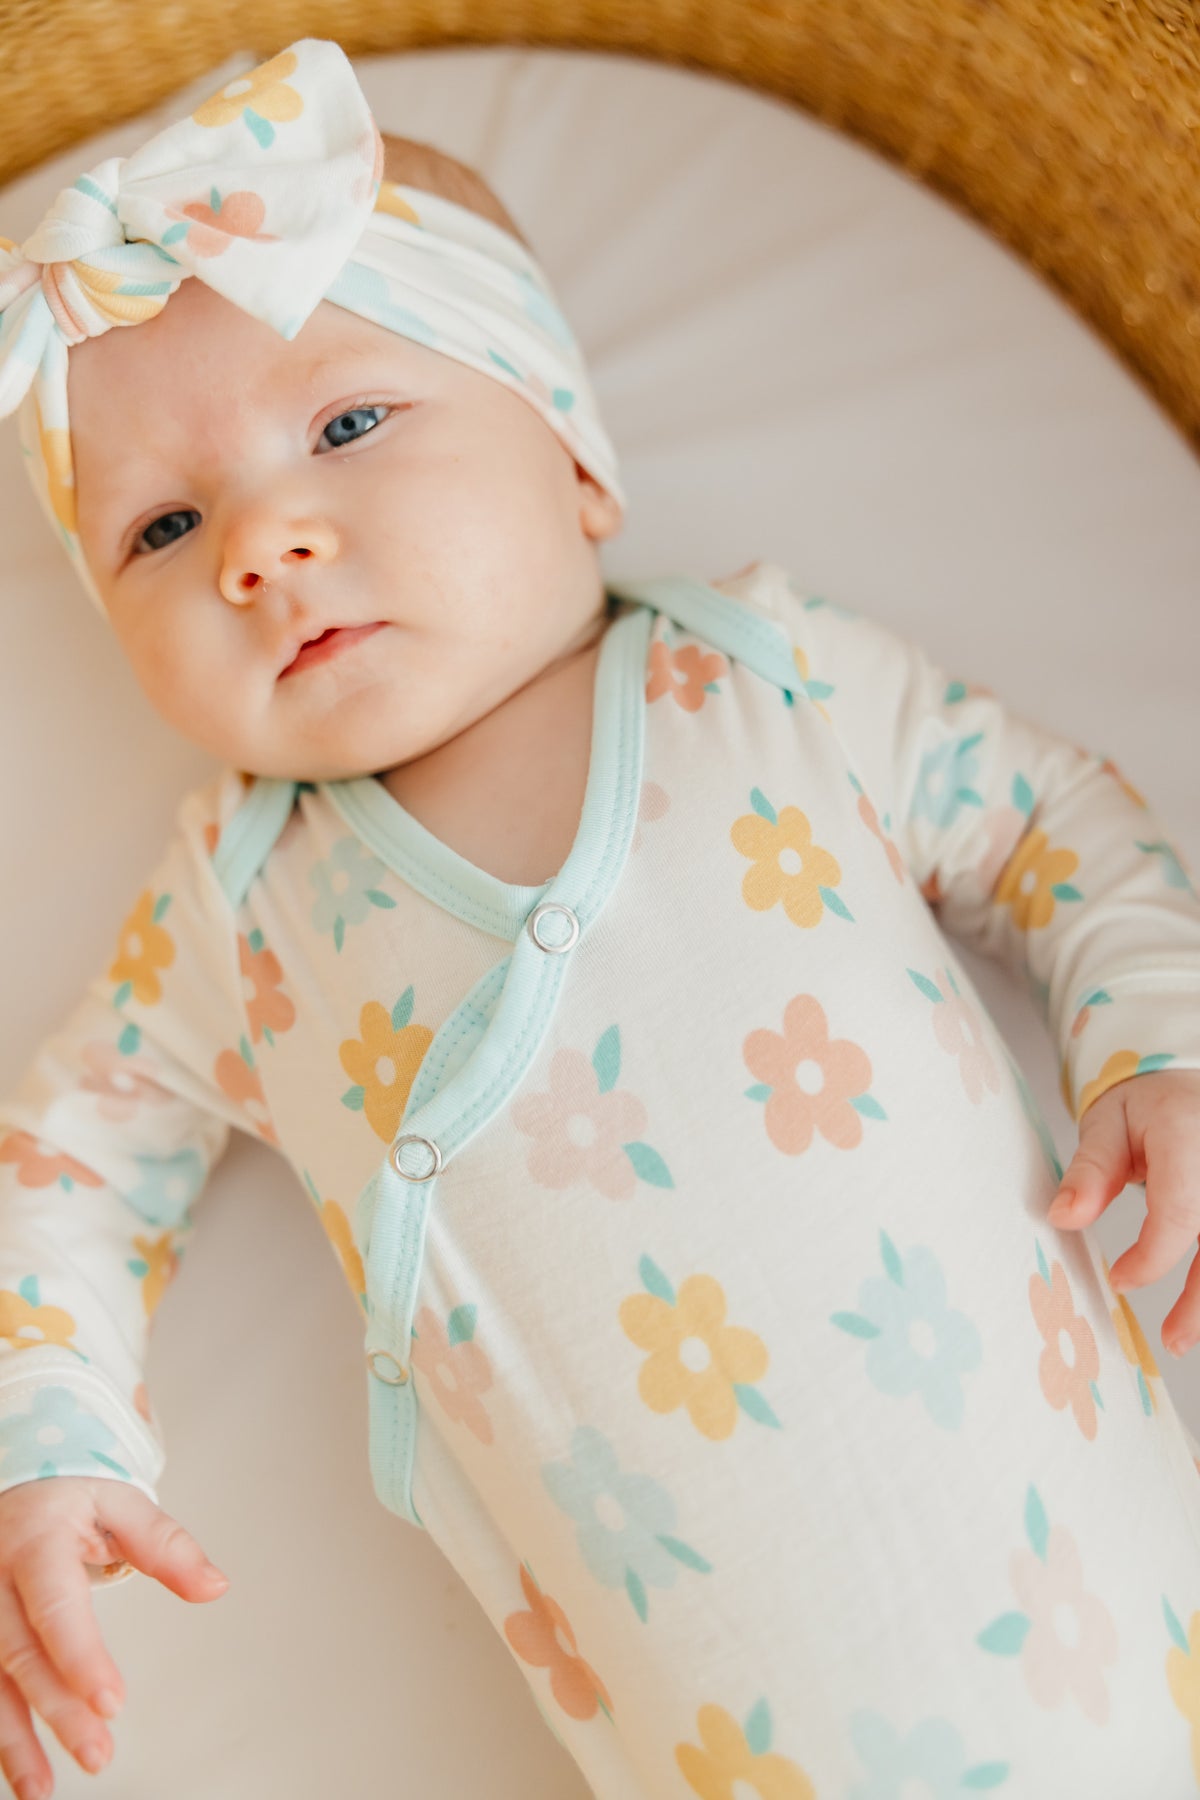 Newborn Knotted Gown - Daisy